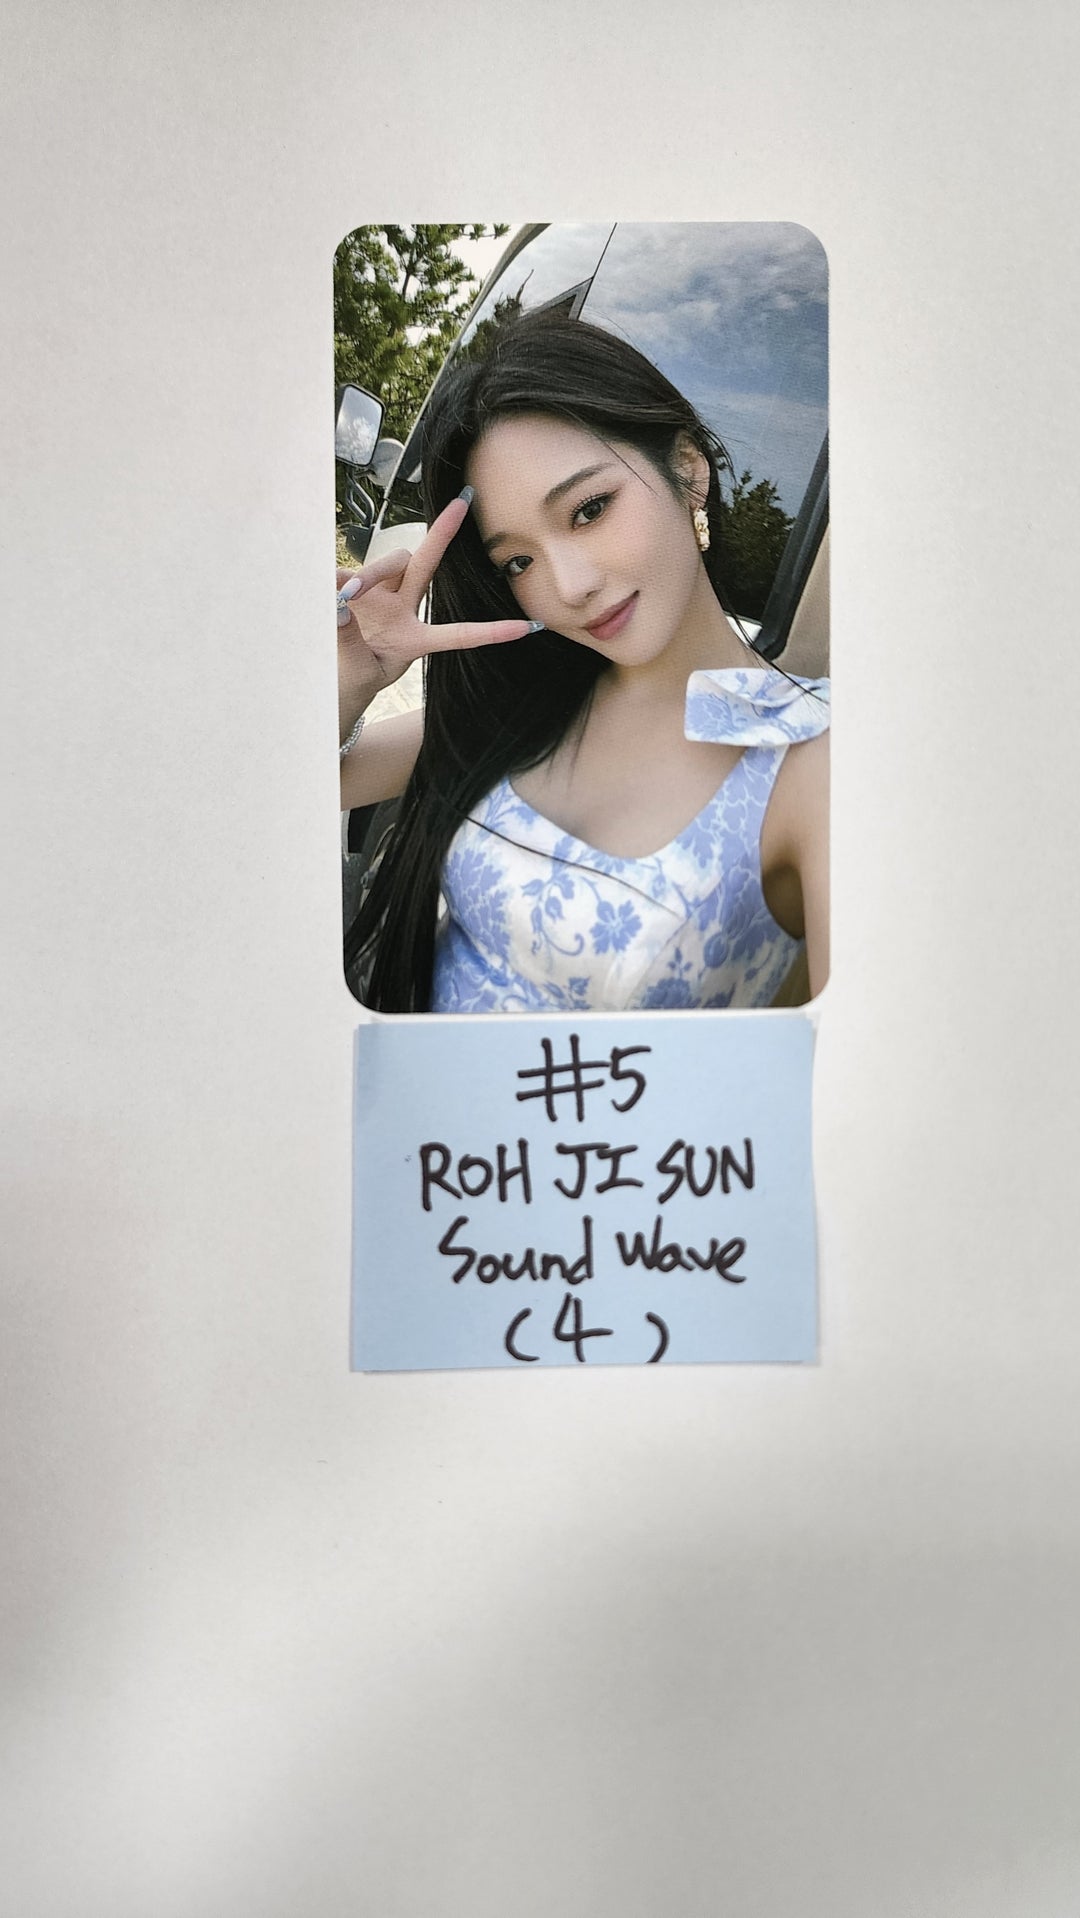 Fromis_9 "from our Memento Box" - Soundwave Luckydraw Slim PVC Photocard